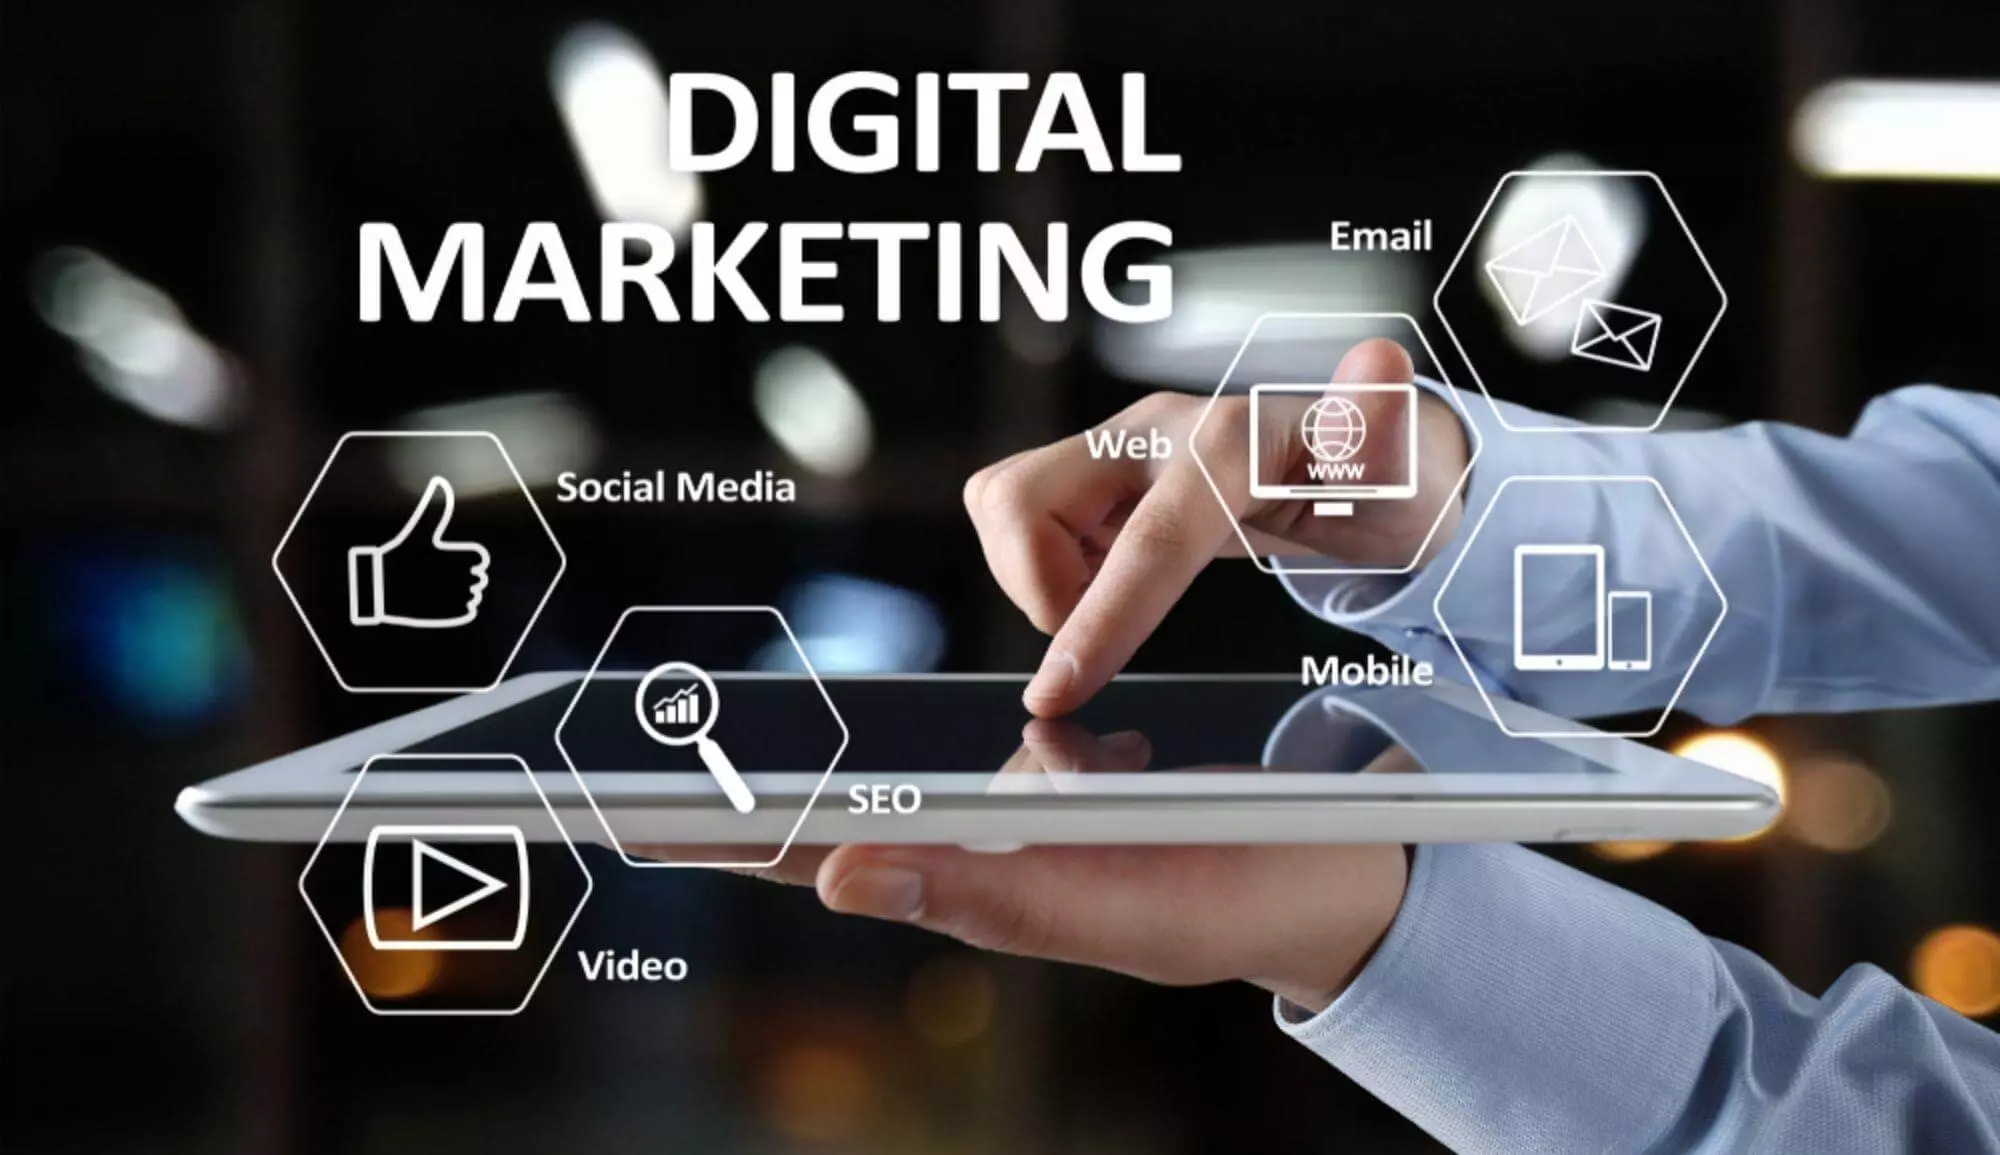 Digital Marketing and related services such as Social Media, Video, Web, Mobile, Email, and SEO are displayed floating over a white Tab